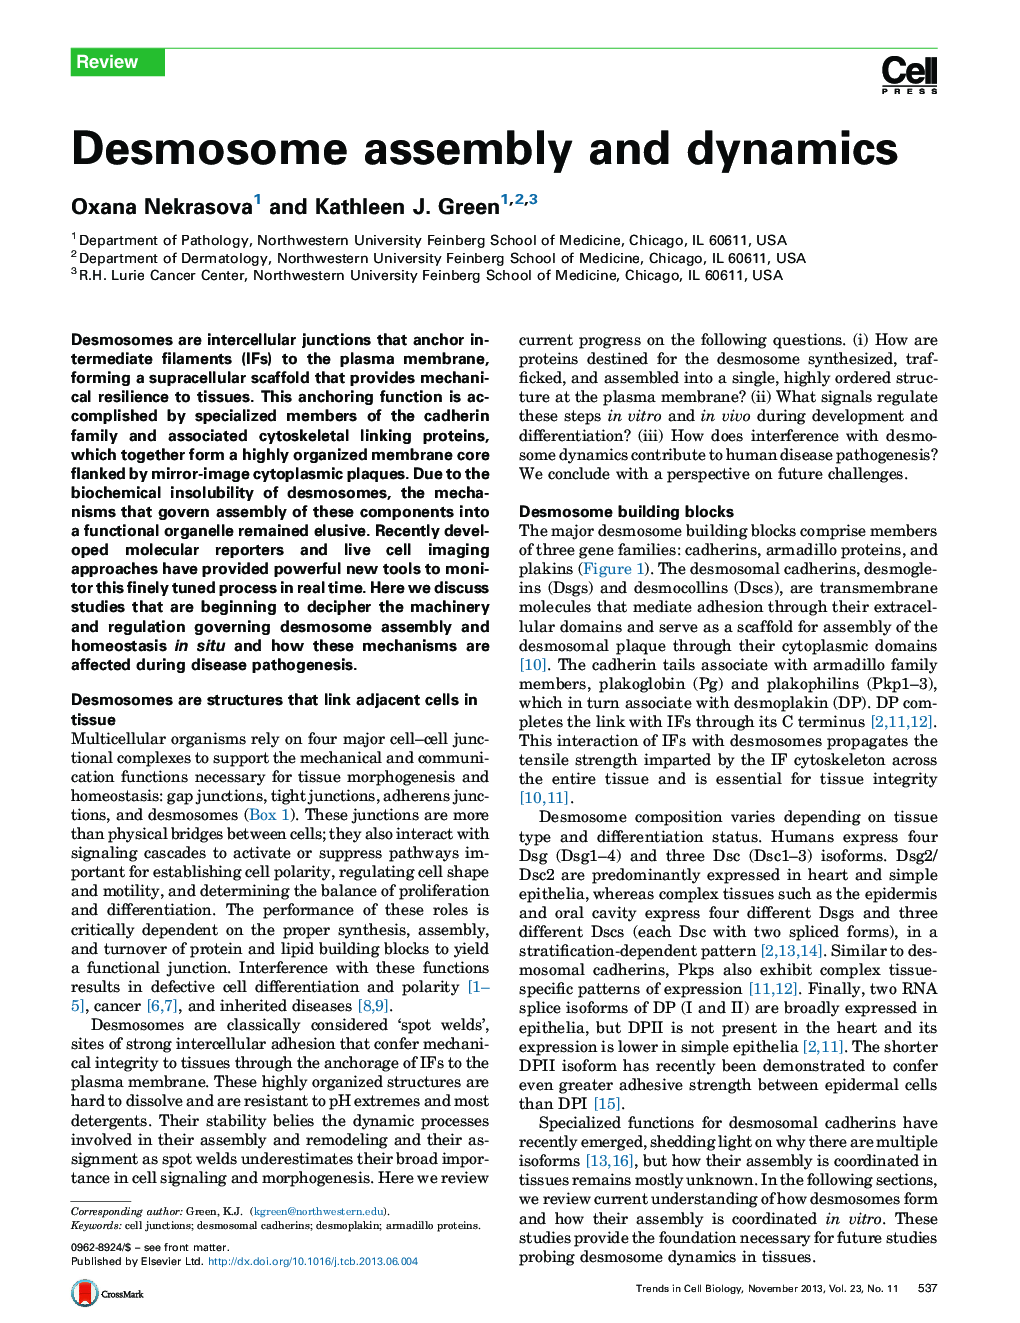 Desmosome assembly and dynamics